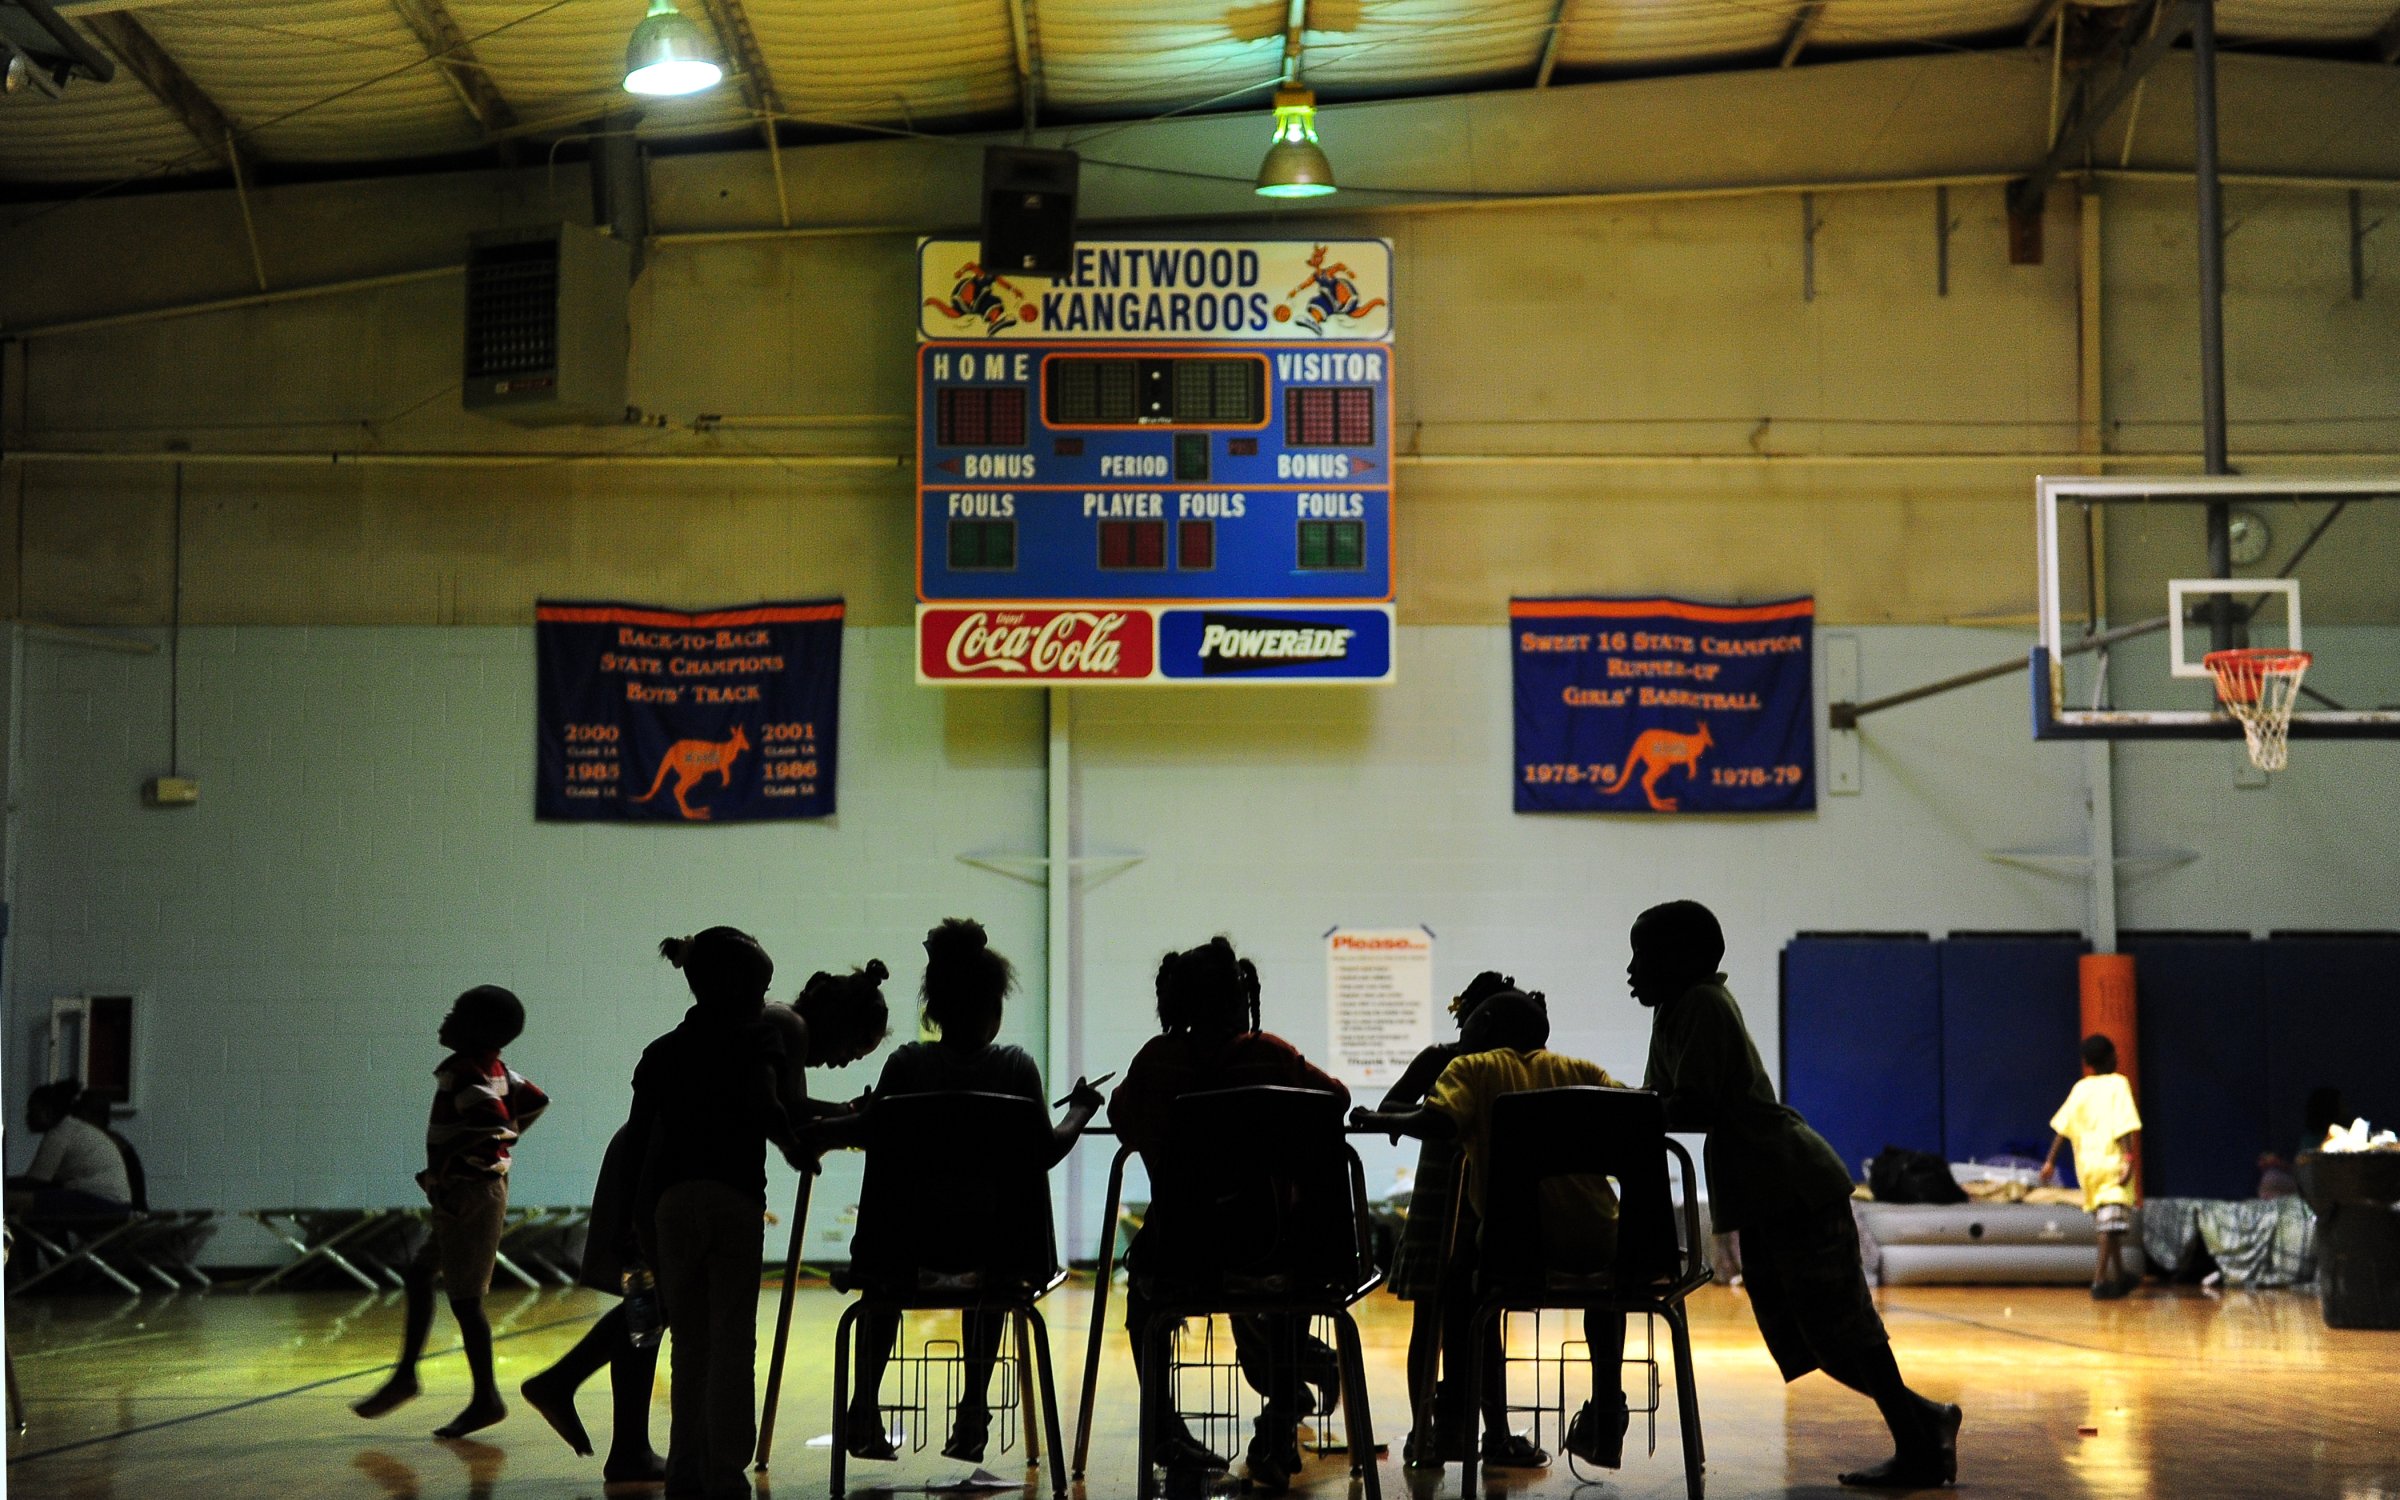 Children try to do their homework at an evacuation shelter in a high school gymnasium in Kentwood, Louisiana on August 30, 2012.